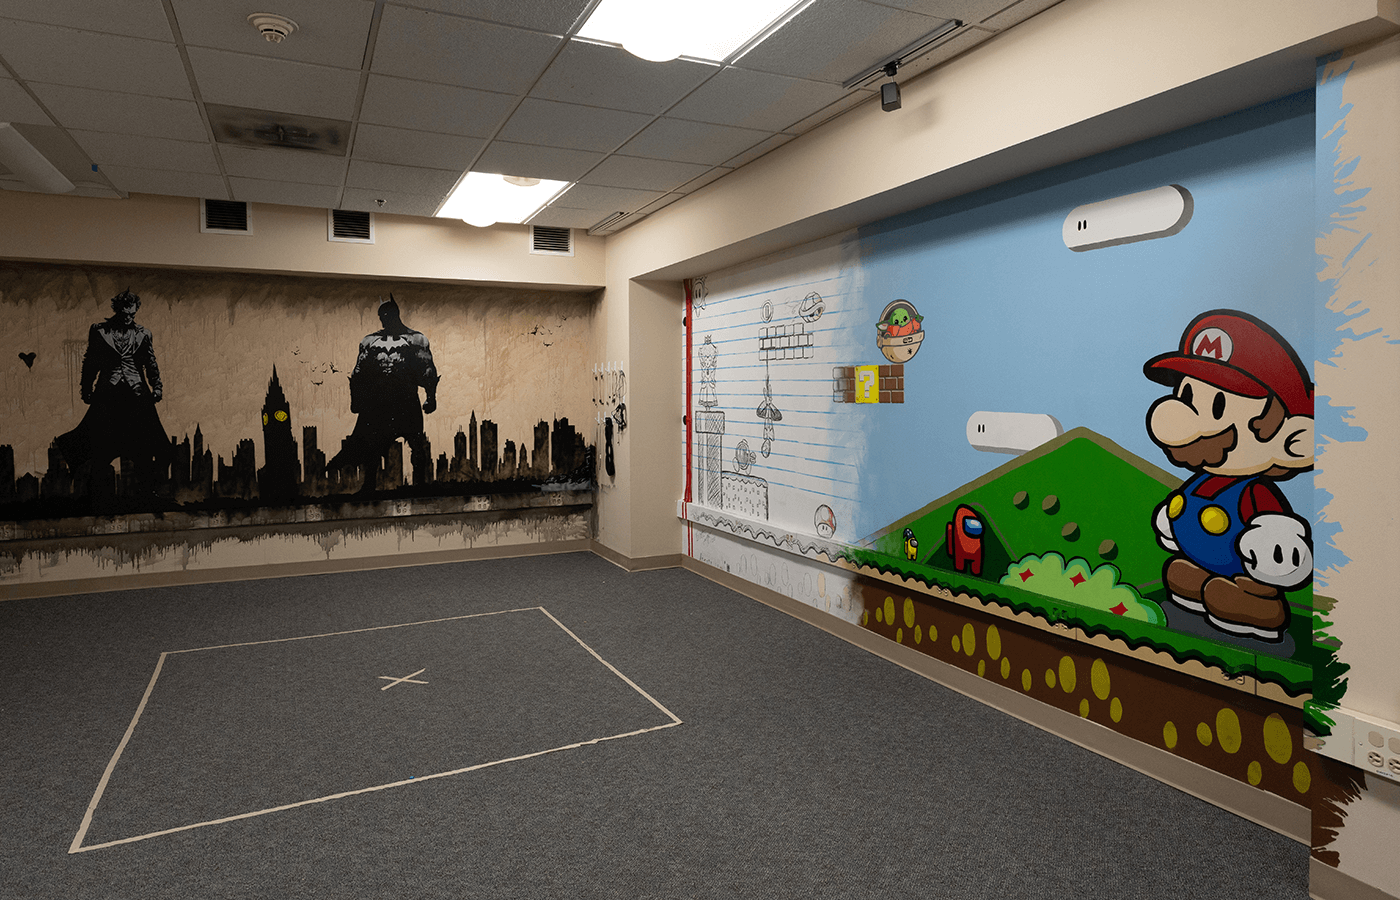 Two murals, one of Batman and one of Super Mario, in a medical center laboratory